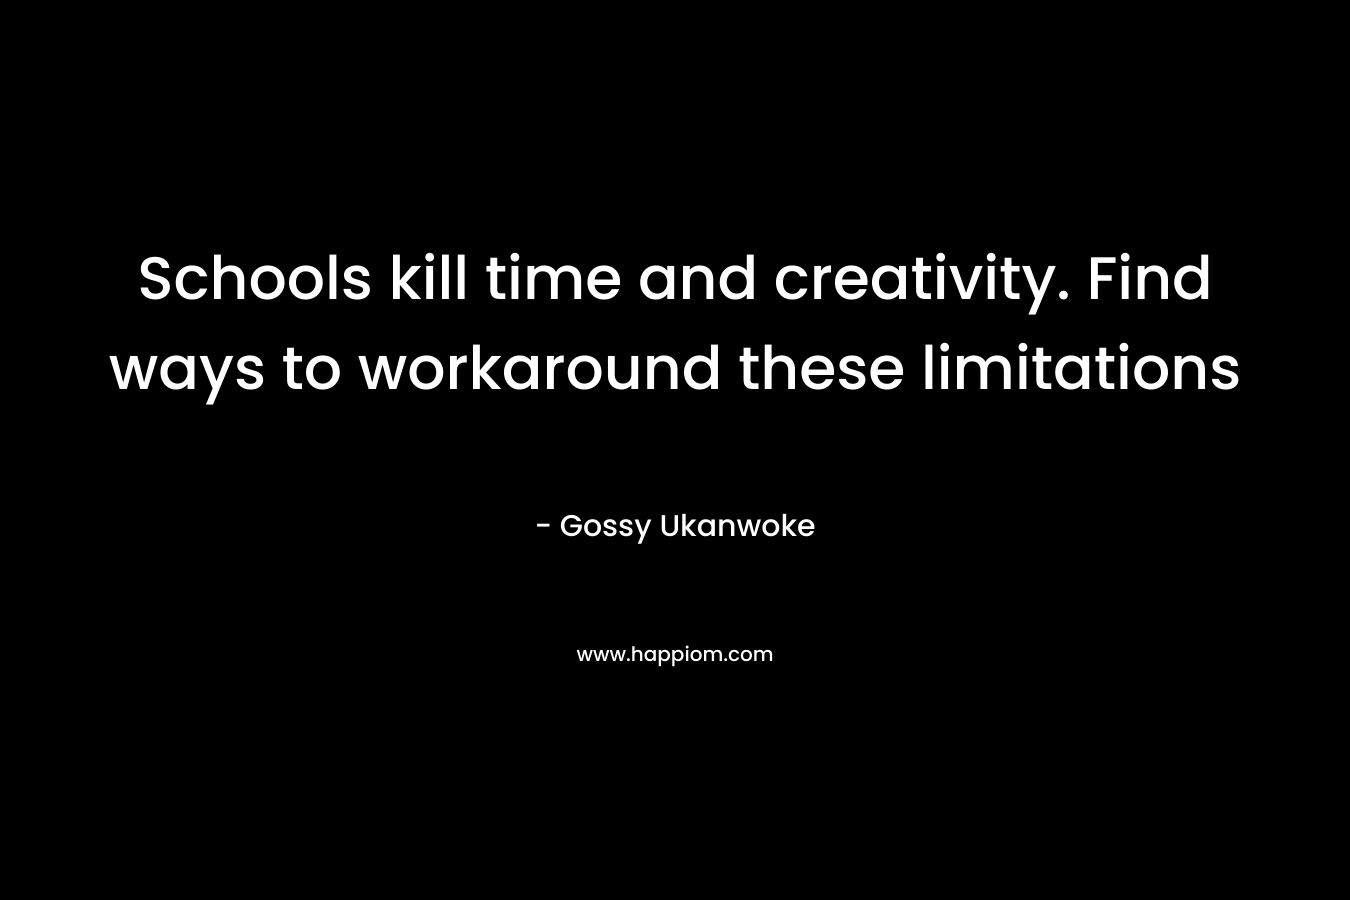 Schools kill time and creativity. Find ways to workaround these limitations